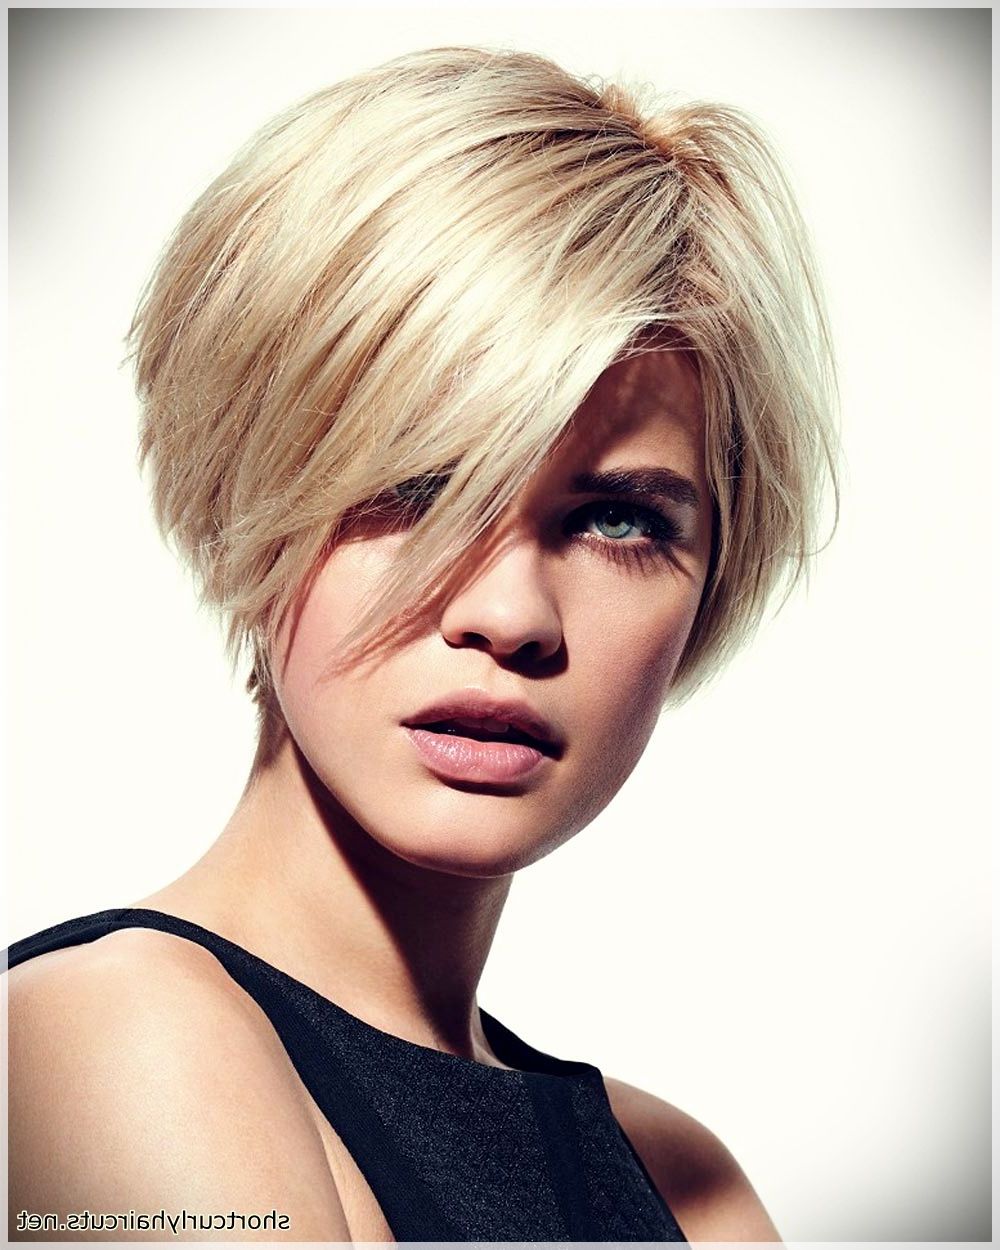 Edgy Short Hairstyles And Cuts Click For Other Hair Styles Https With Regard To Edgy Short Haircuts (View 5 of 25)